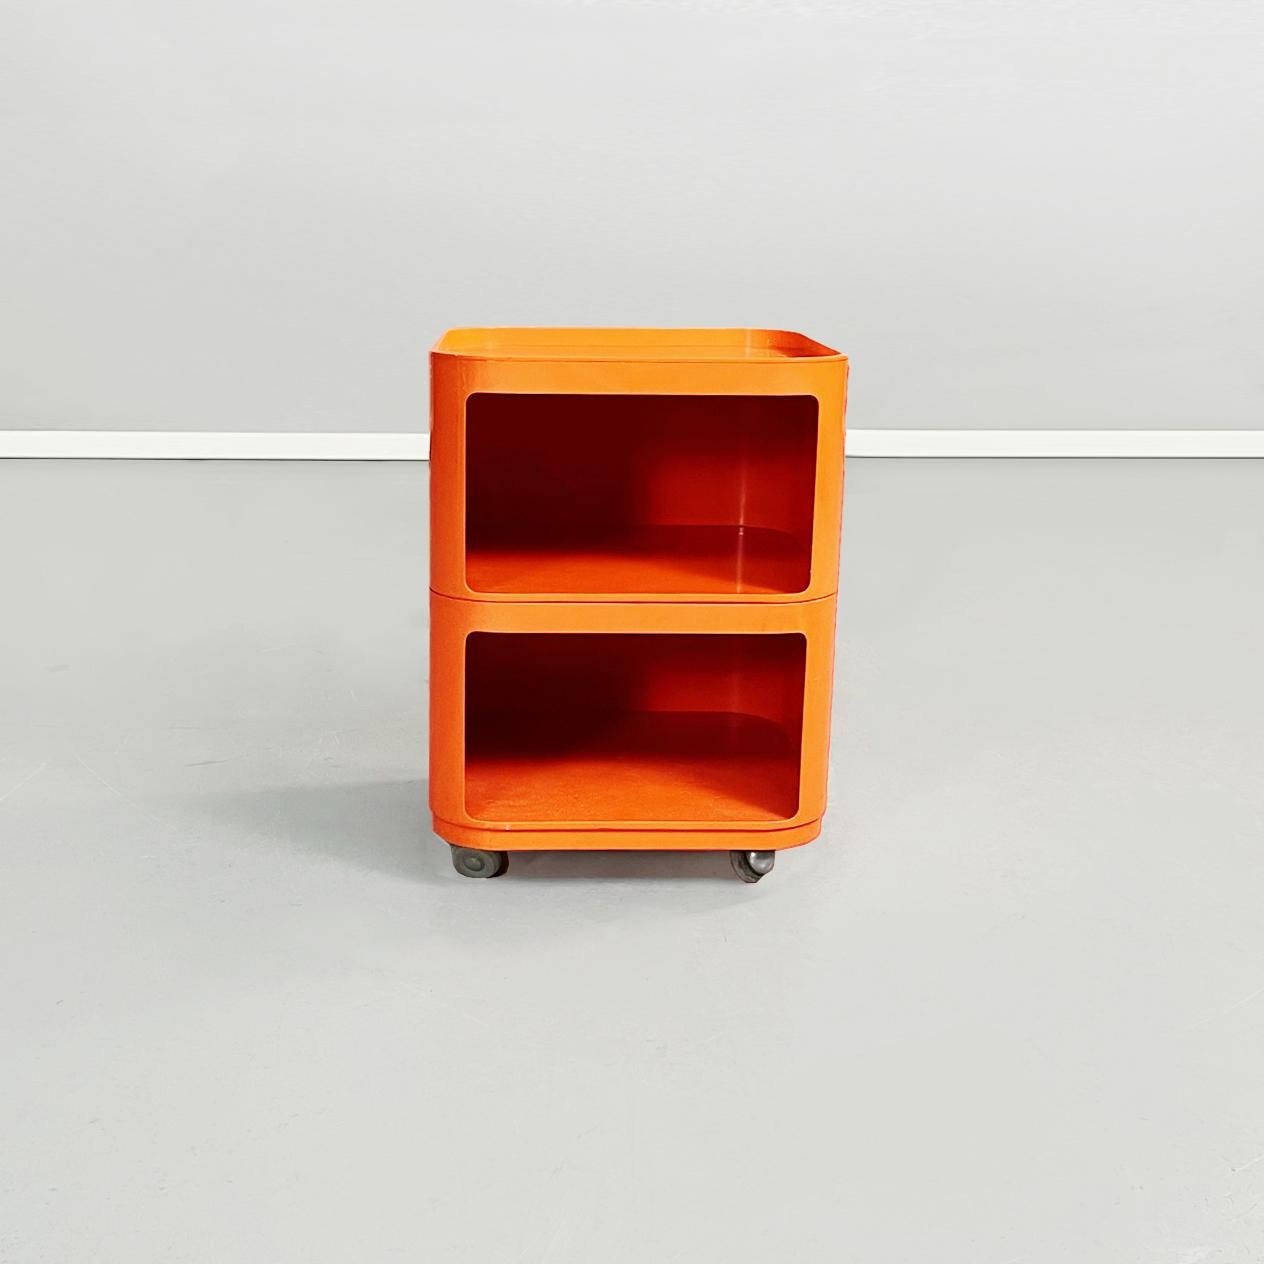 Italian mid-century Orange plastic chest of drawers by Castelli for Kartell, 1970s
Modular chest of drawers with a square base with rounded corners in orange plastic. The chest of drawers has two open compartments. As feet it has black wheels to